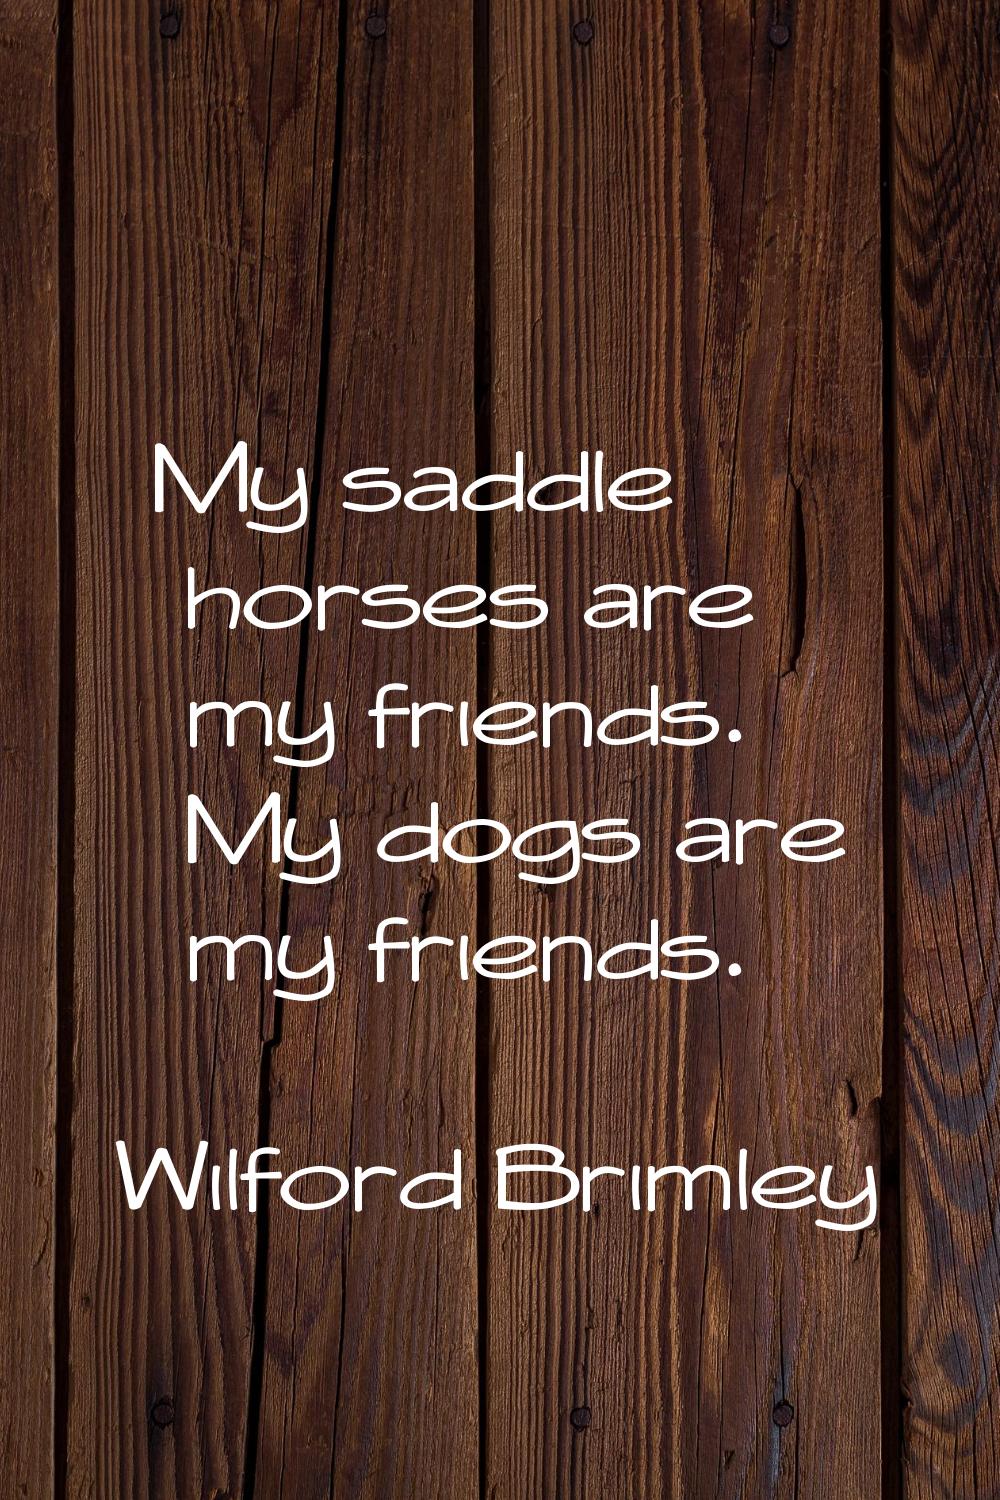 My saddle horses are my friends. My dogs are my friends.